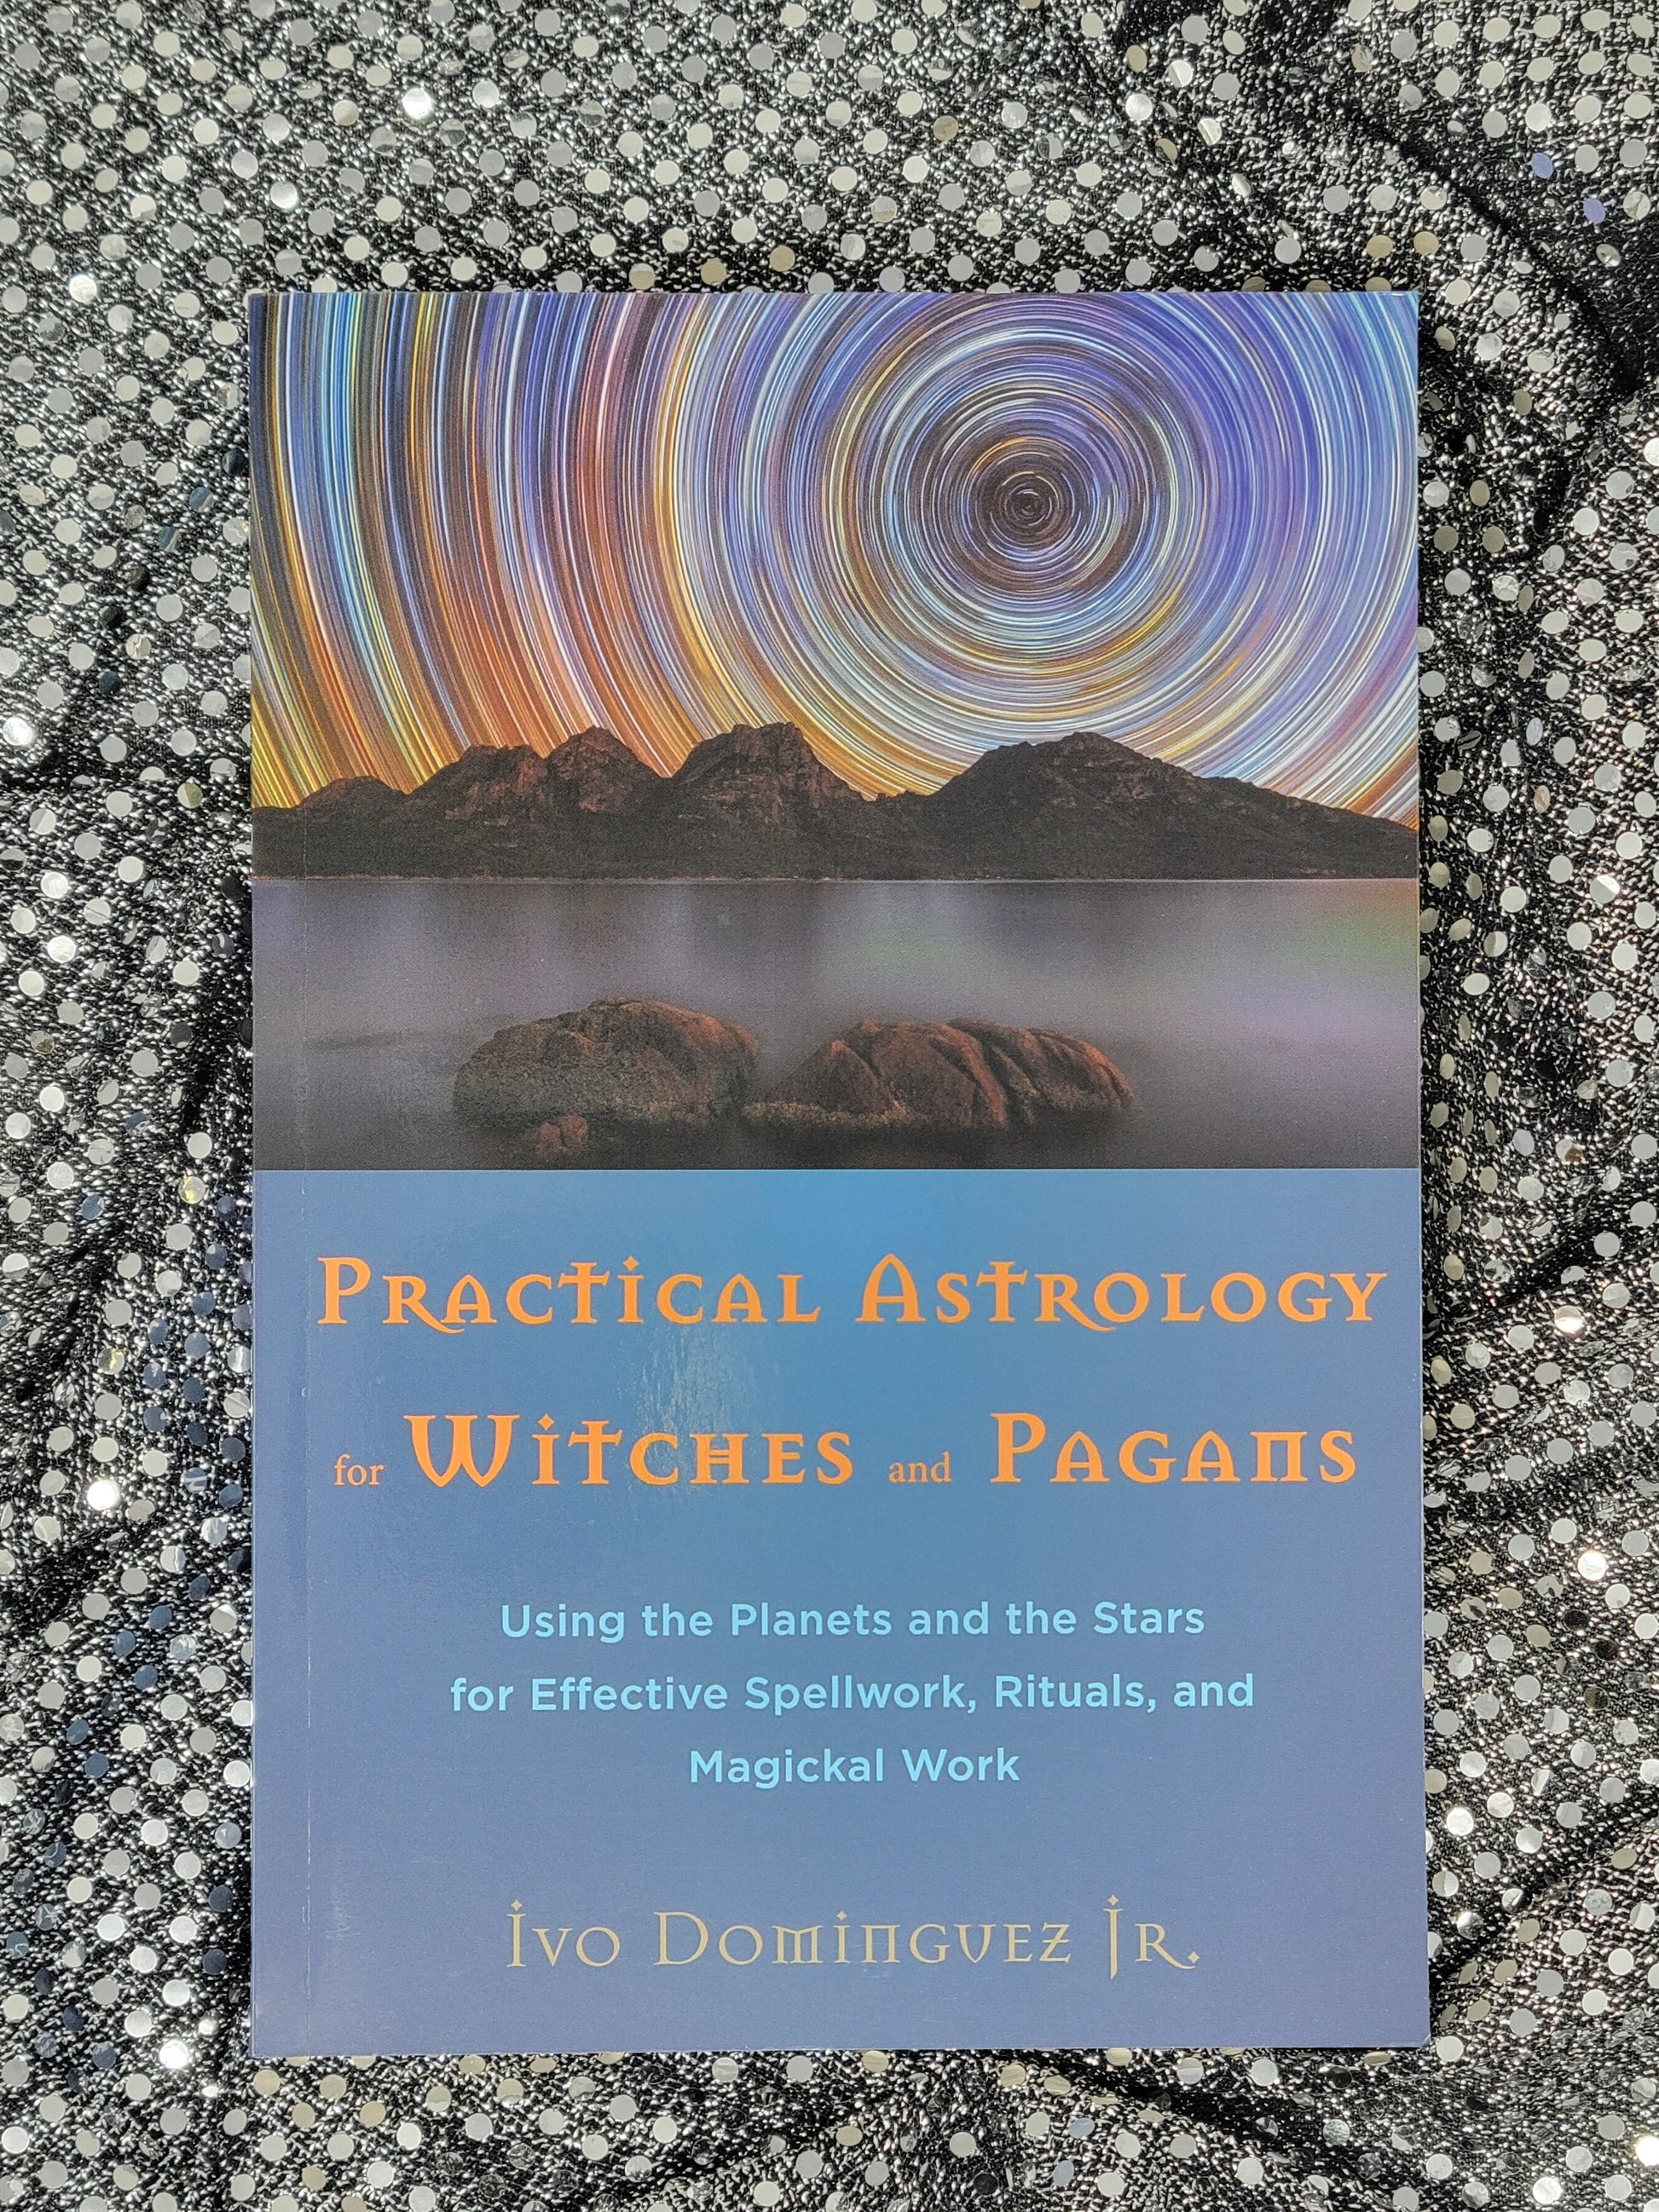 Practical Astrology for Witches and Pagans Using the Planets and the Stars for Effective Spellwork, Rituals, and Magickal Work - Ivo Dominguez Jr.